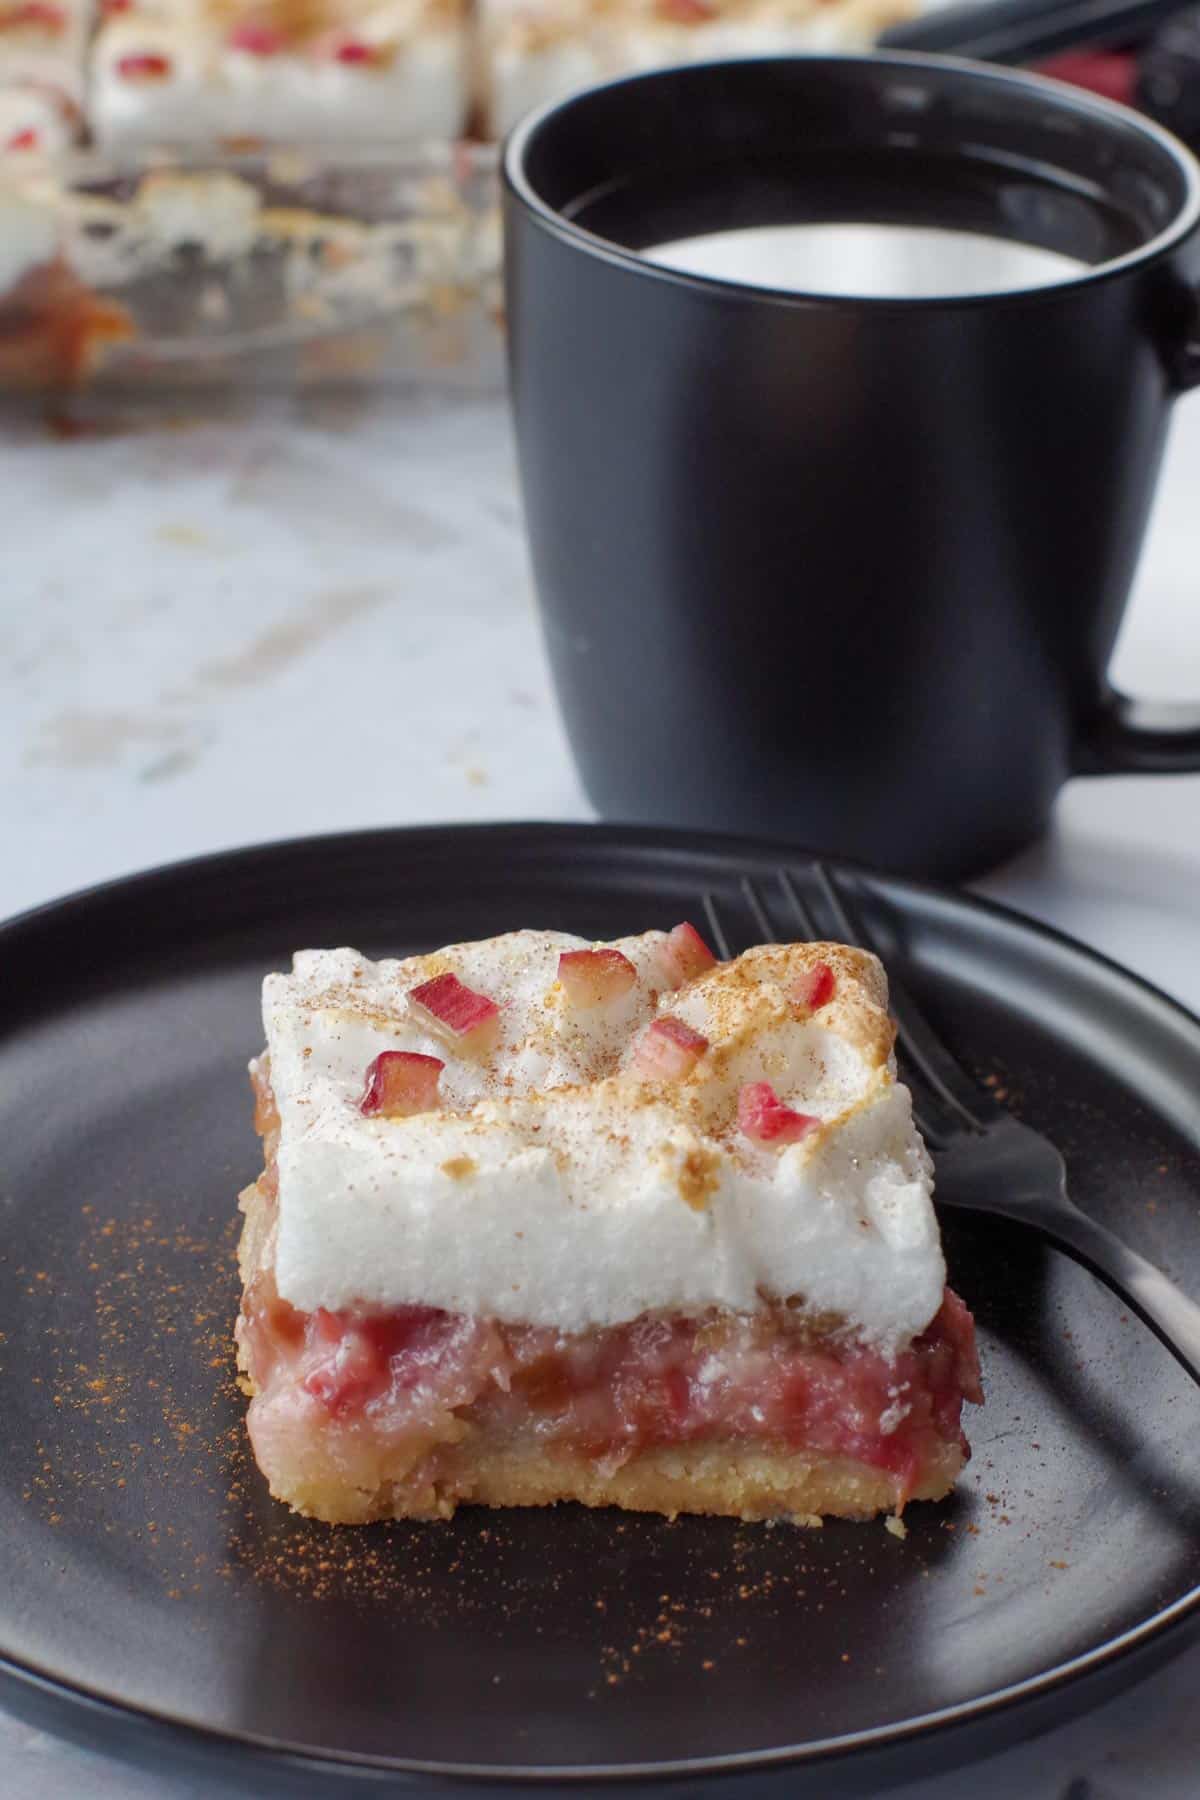 a piece of rhubarb meringue torte on a black plate with a fork and a black cup of coffee in background